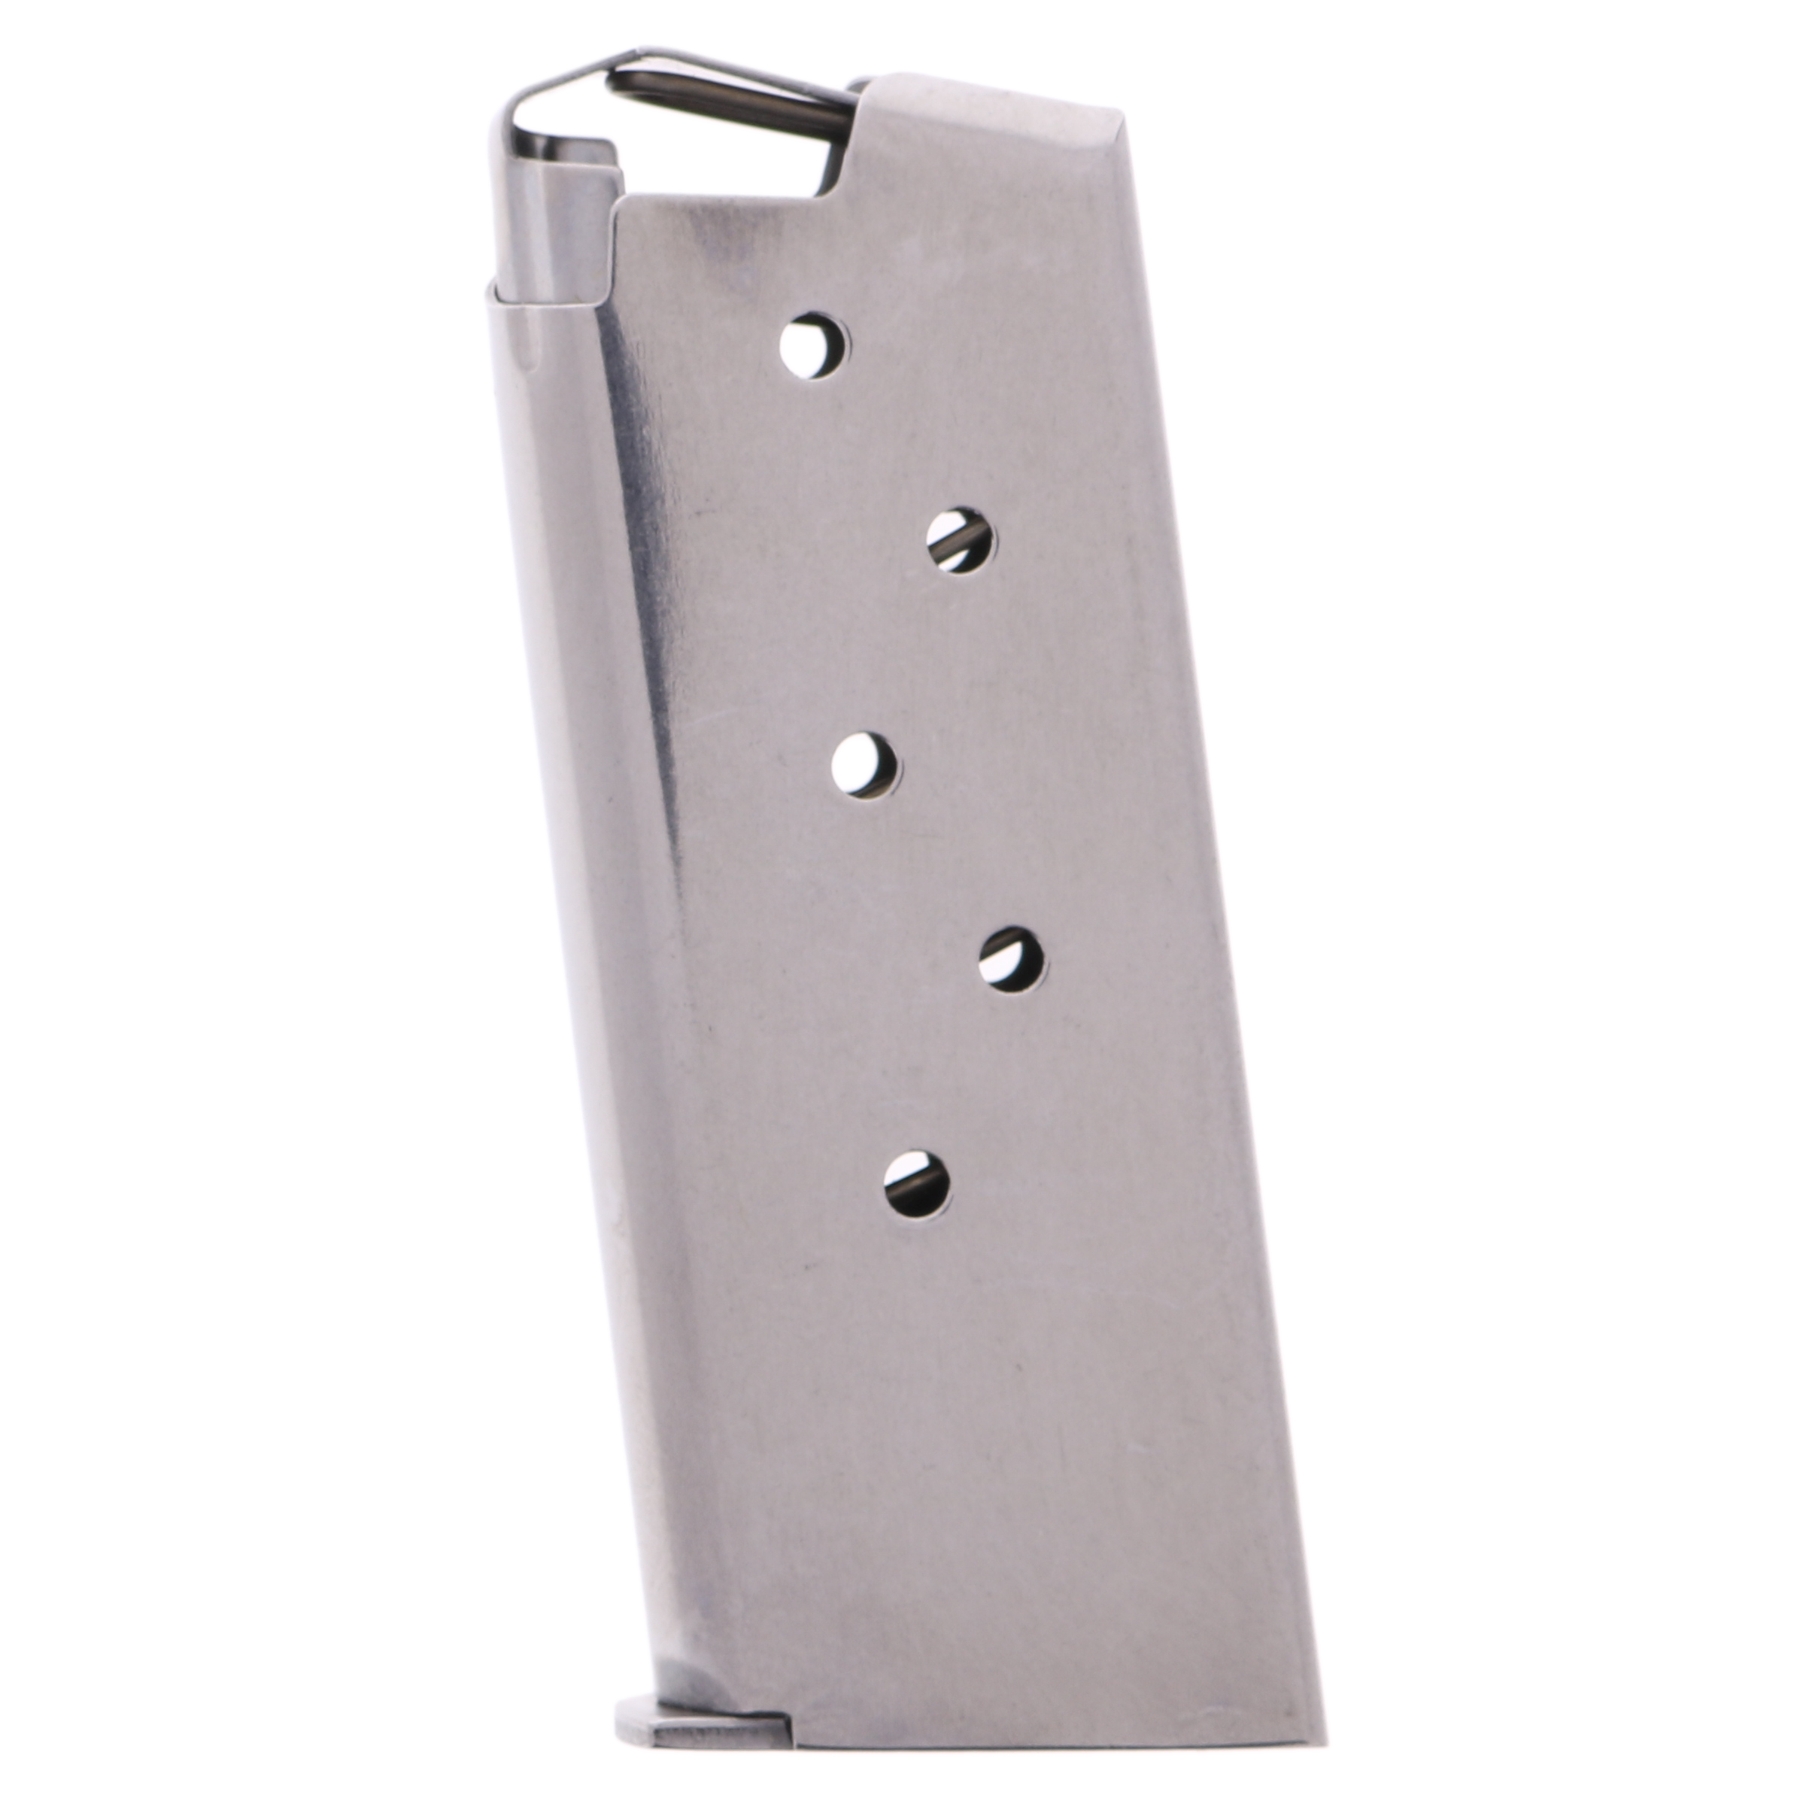 LIFETIME WARRANTY! "THUMBLESS" Magazine SpeedLoader for the Kimber Micro 9 9mm